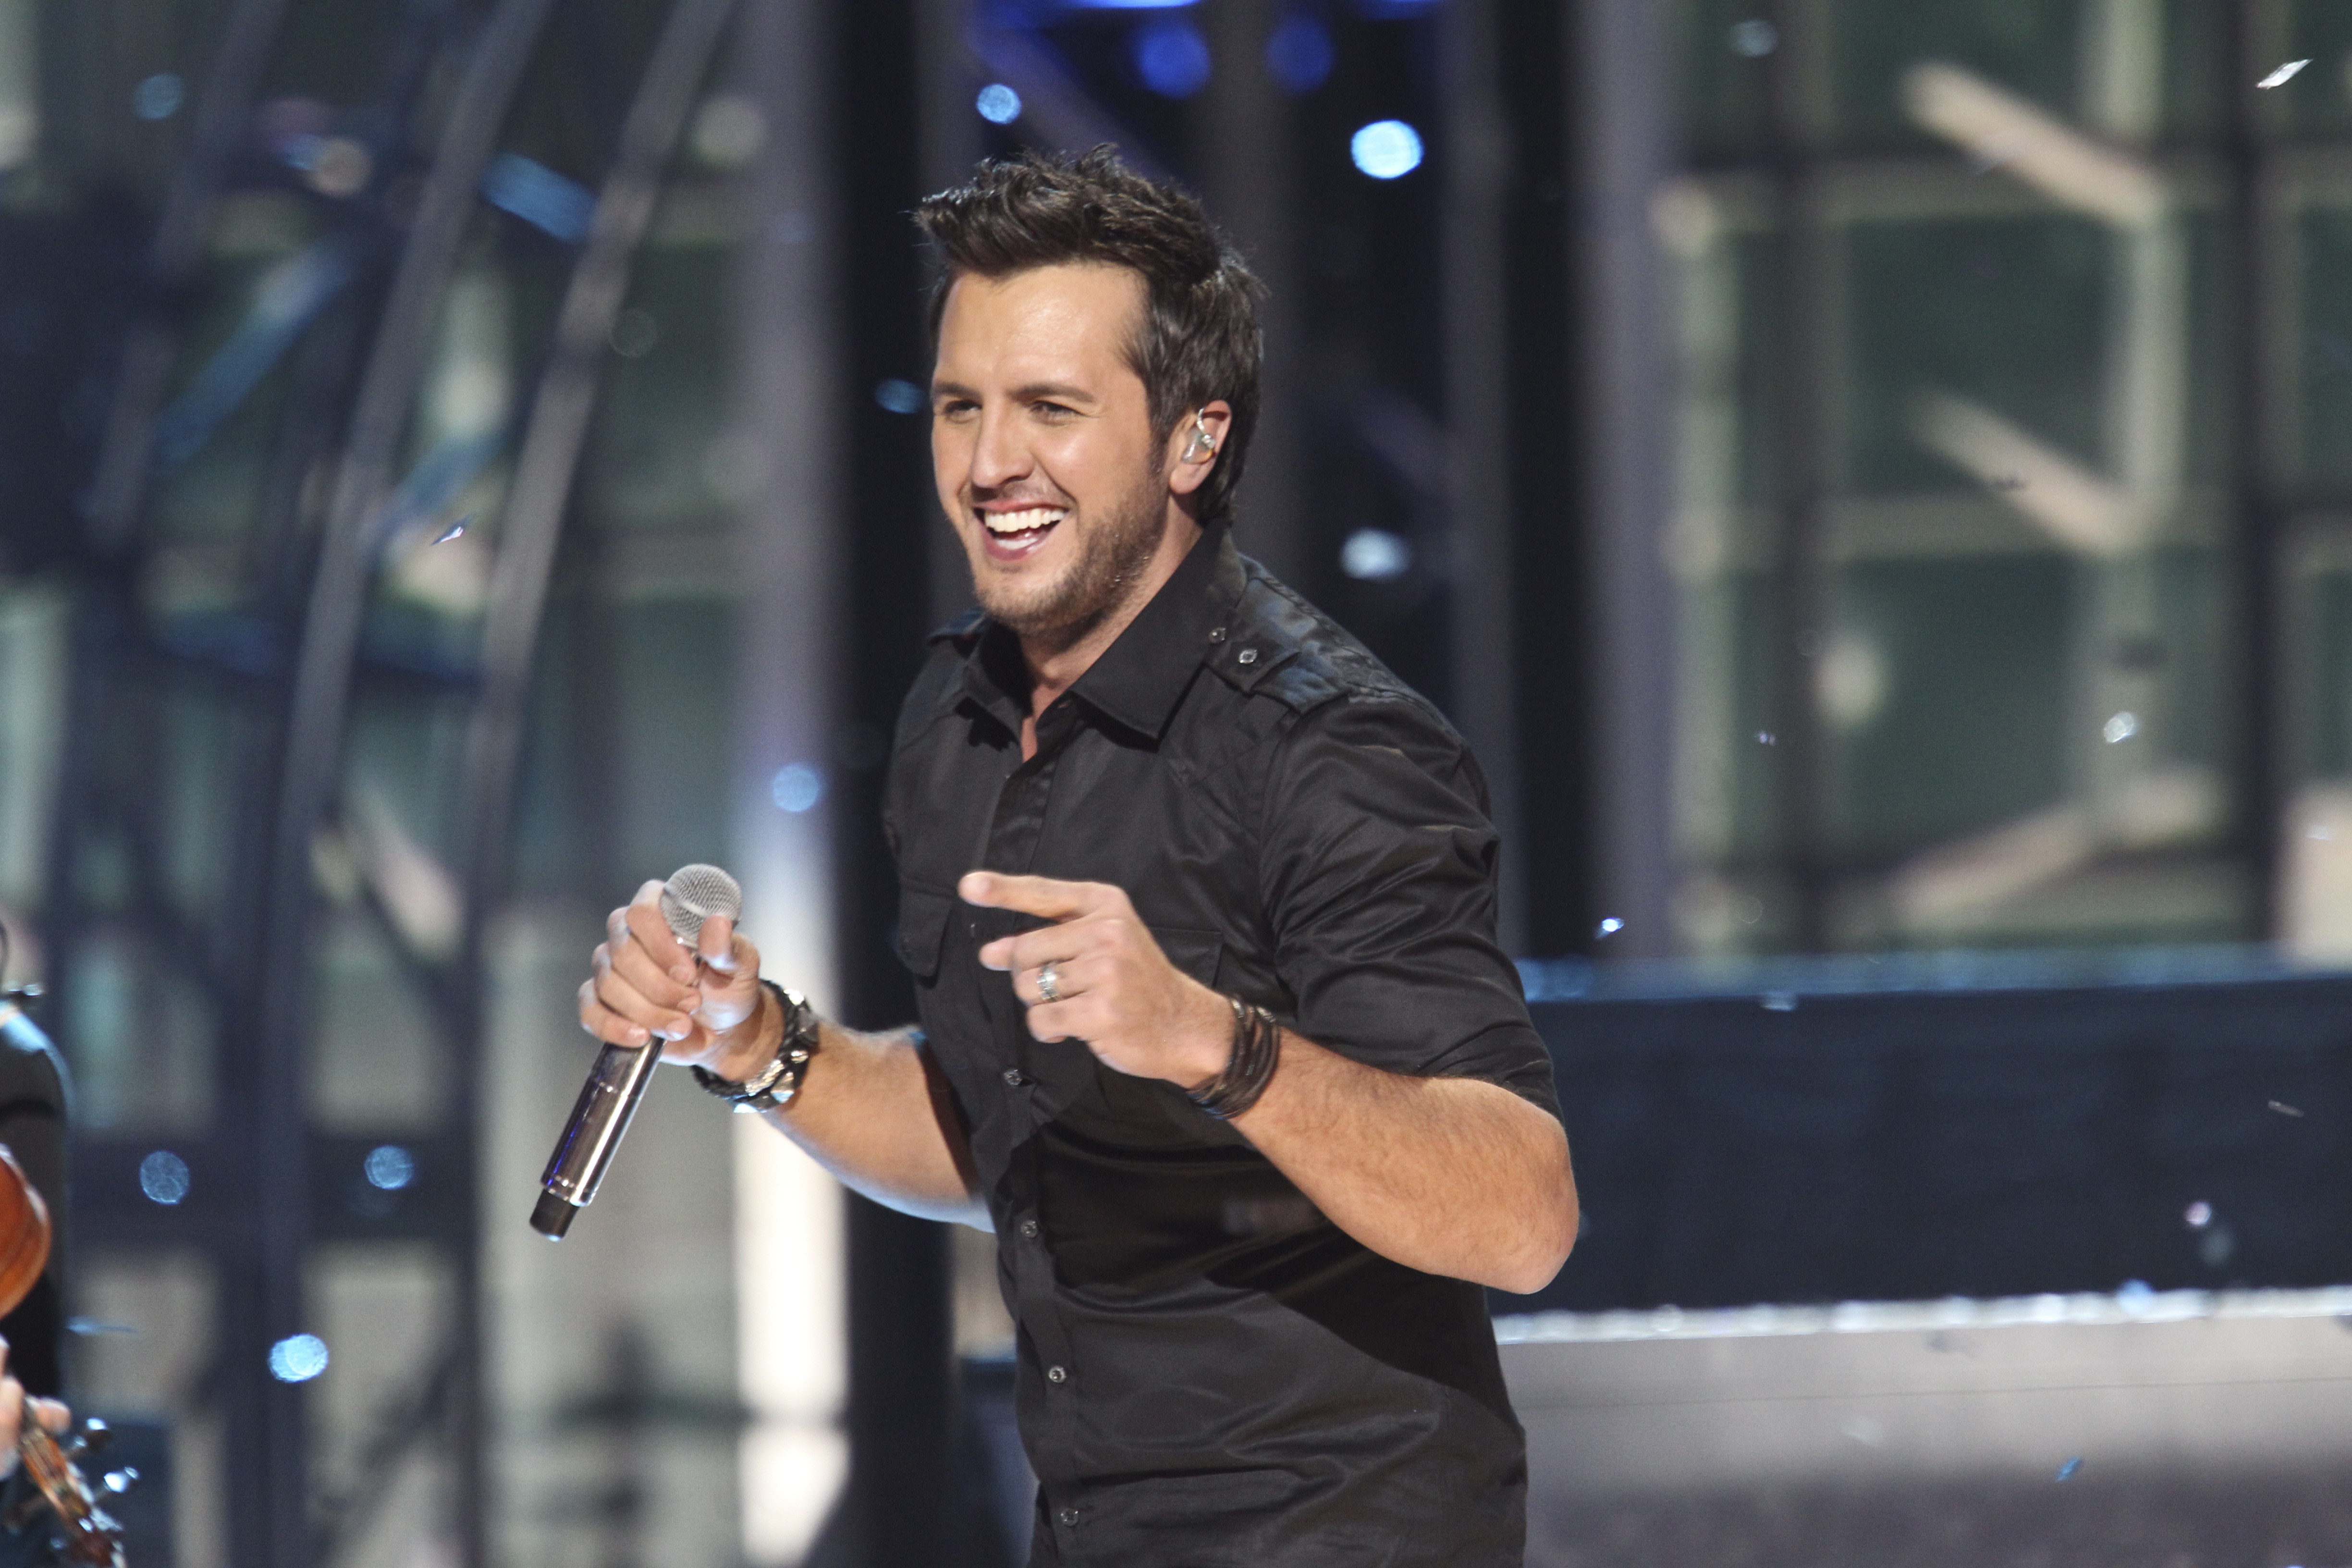 Luke Bryan scheduled to perform on the 48th annual ACM Awards